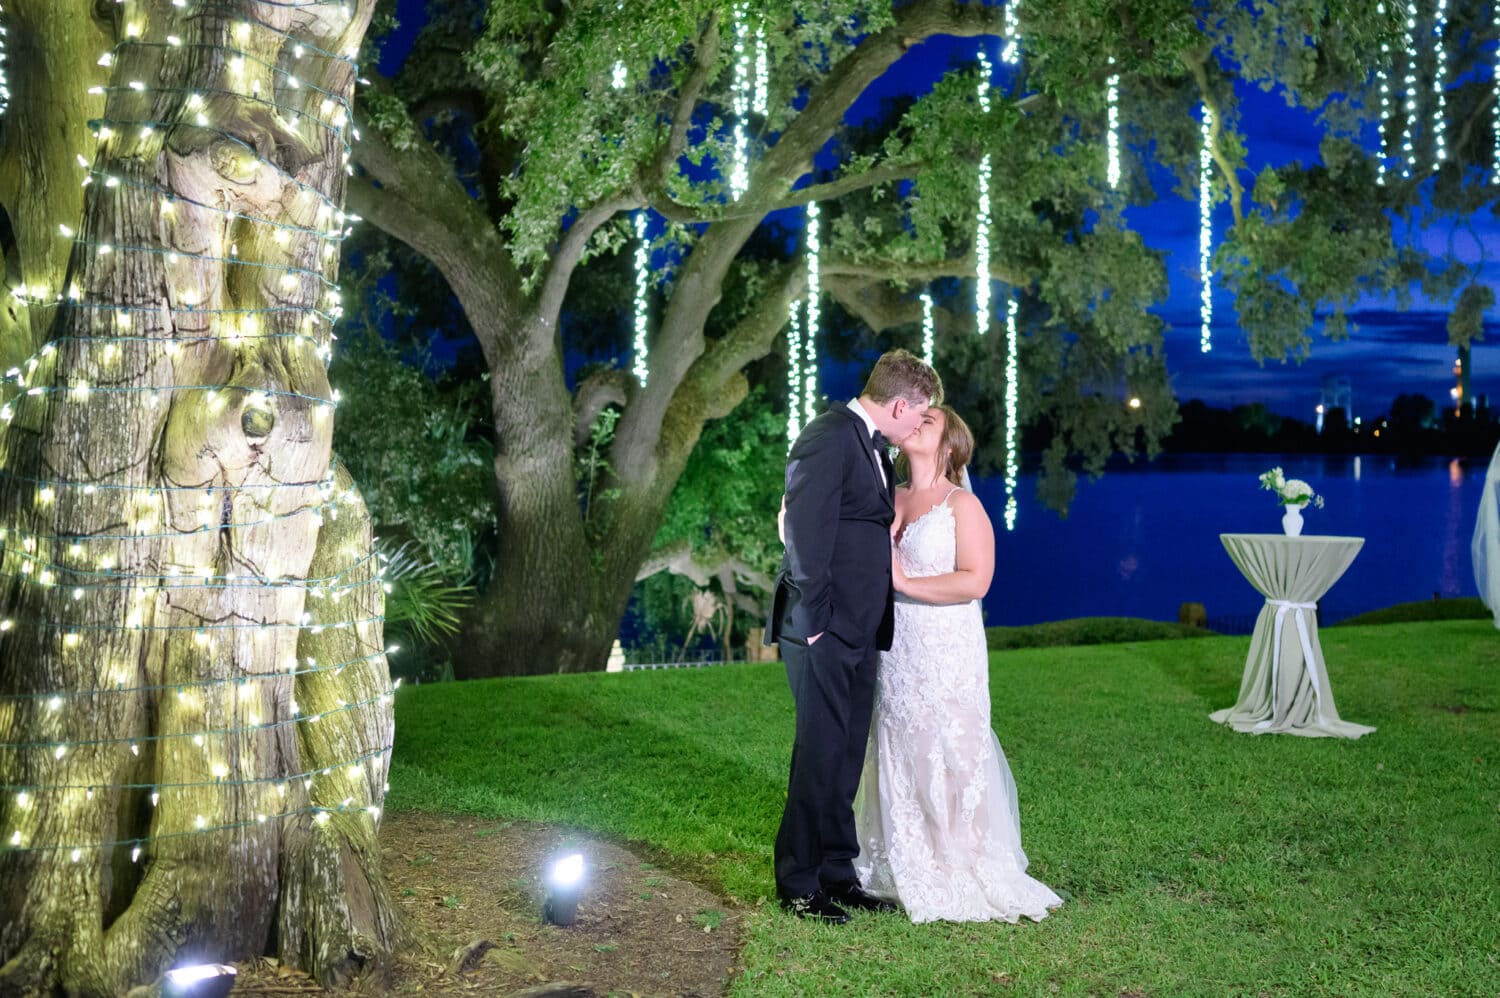 Kiss under the lights hanging from the trees - Kaminski House Museum